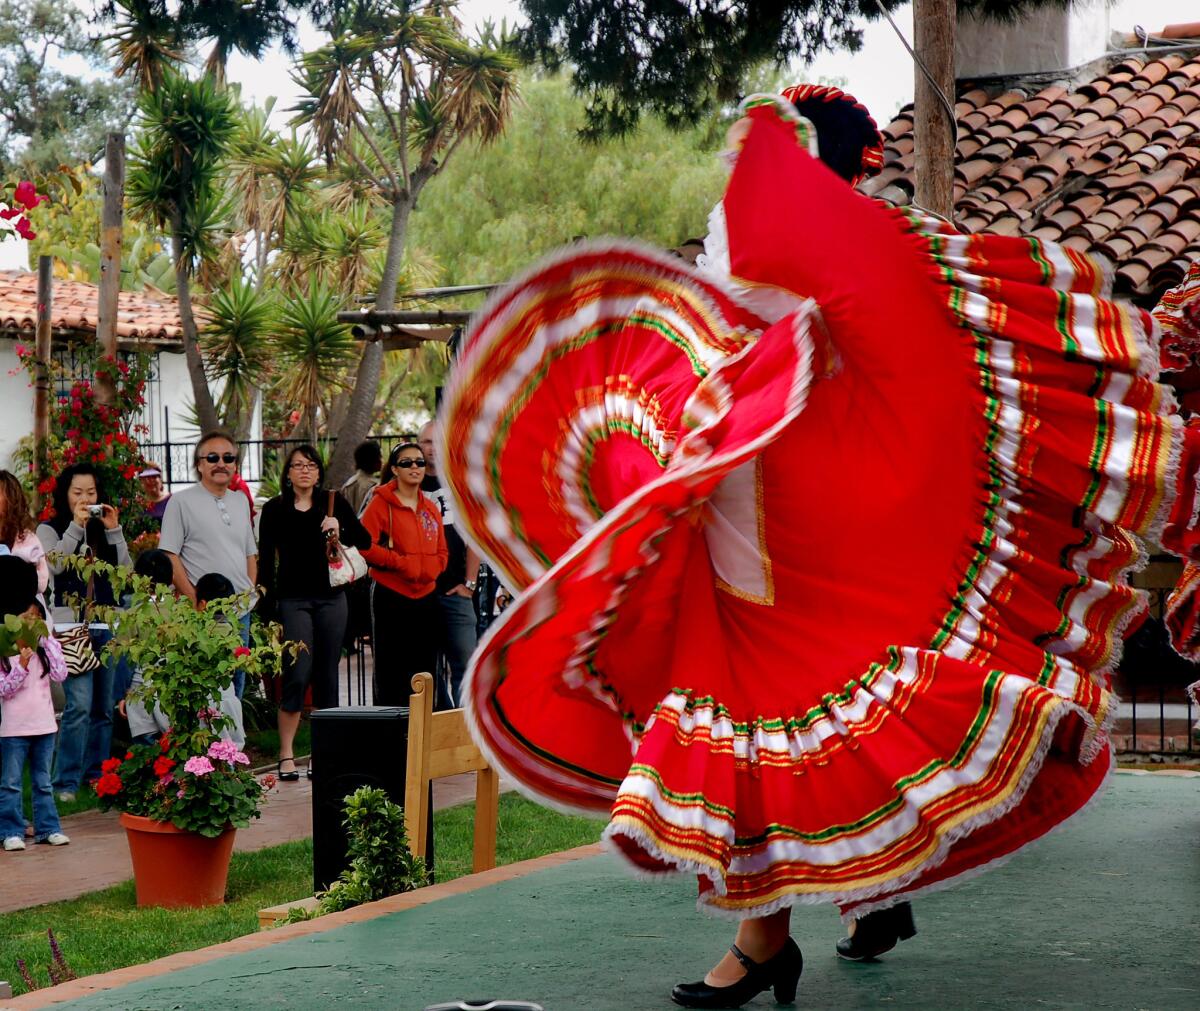 Carlsbad and San Diego: Folk dancers are part of the appeal at Old Town San Diego State Historic Park.